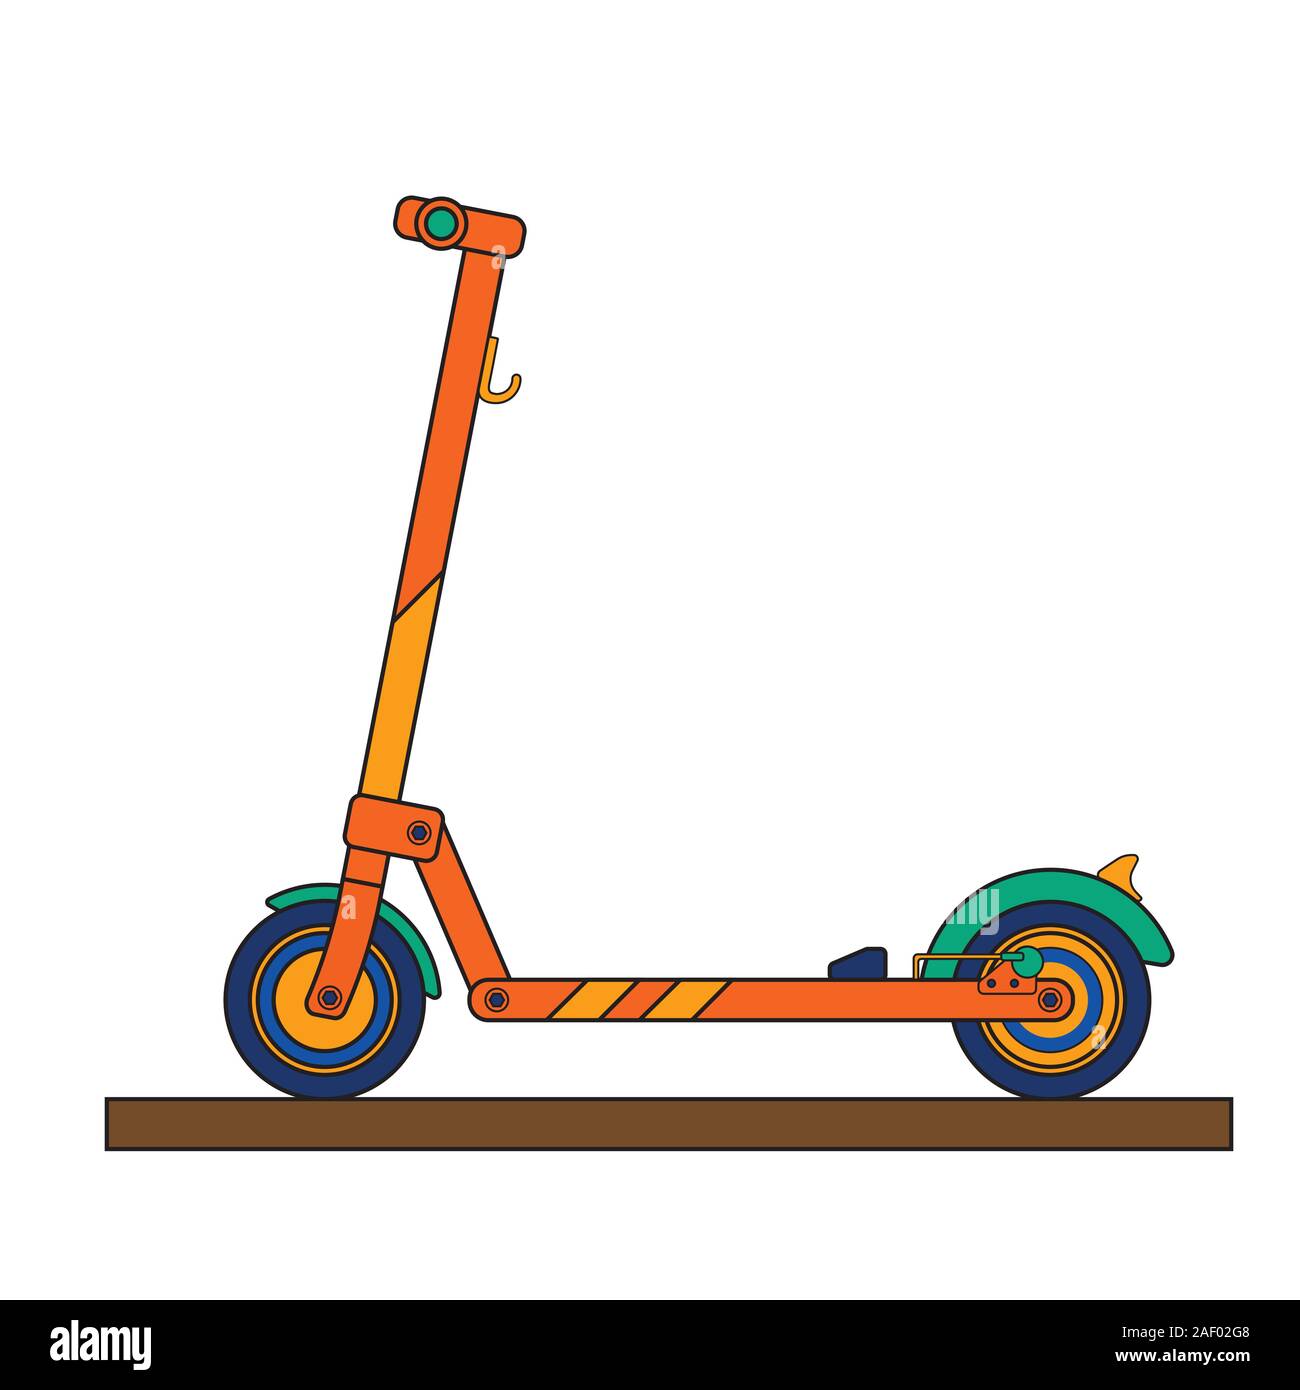 Modern electric scooter drawn in a flat style. Stock Vector